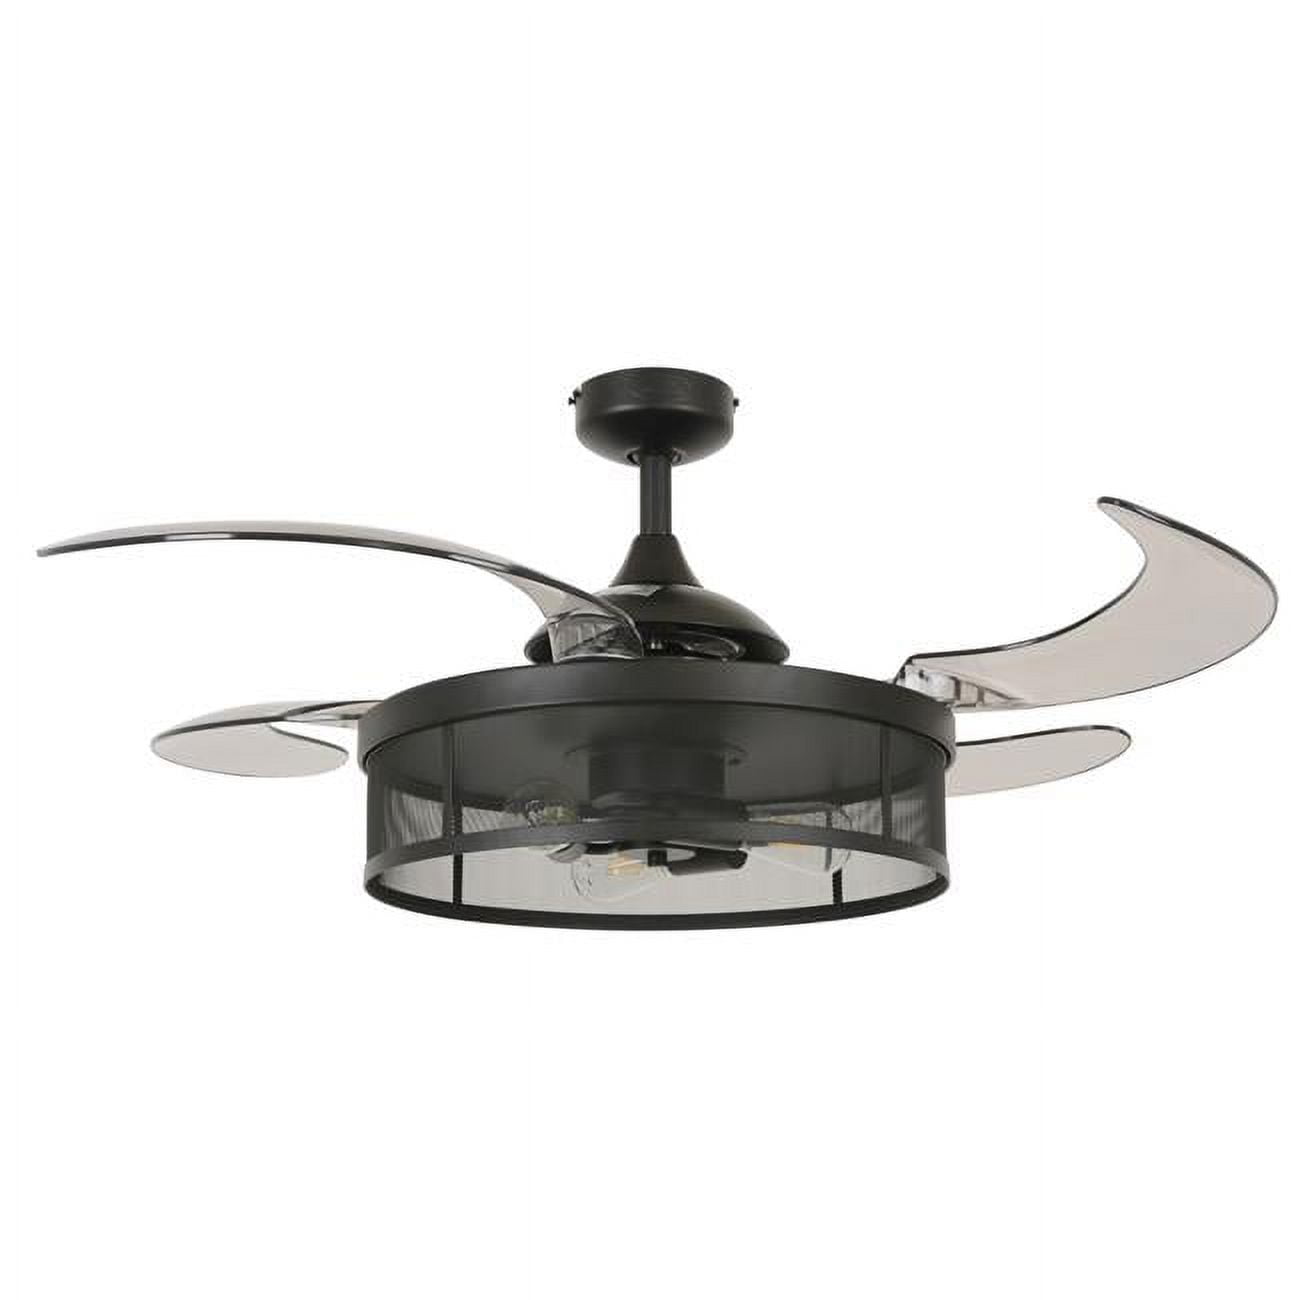 Picture of Fanaway 51107101 Meridian 48-inch Black AC Ceiling Fan with Light